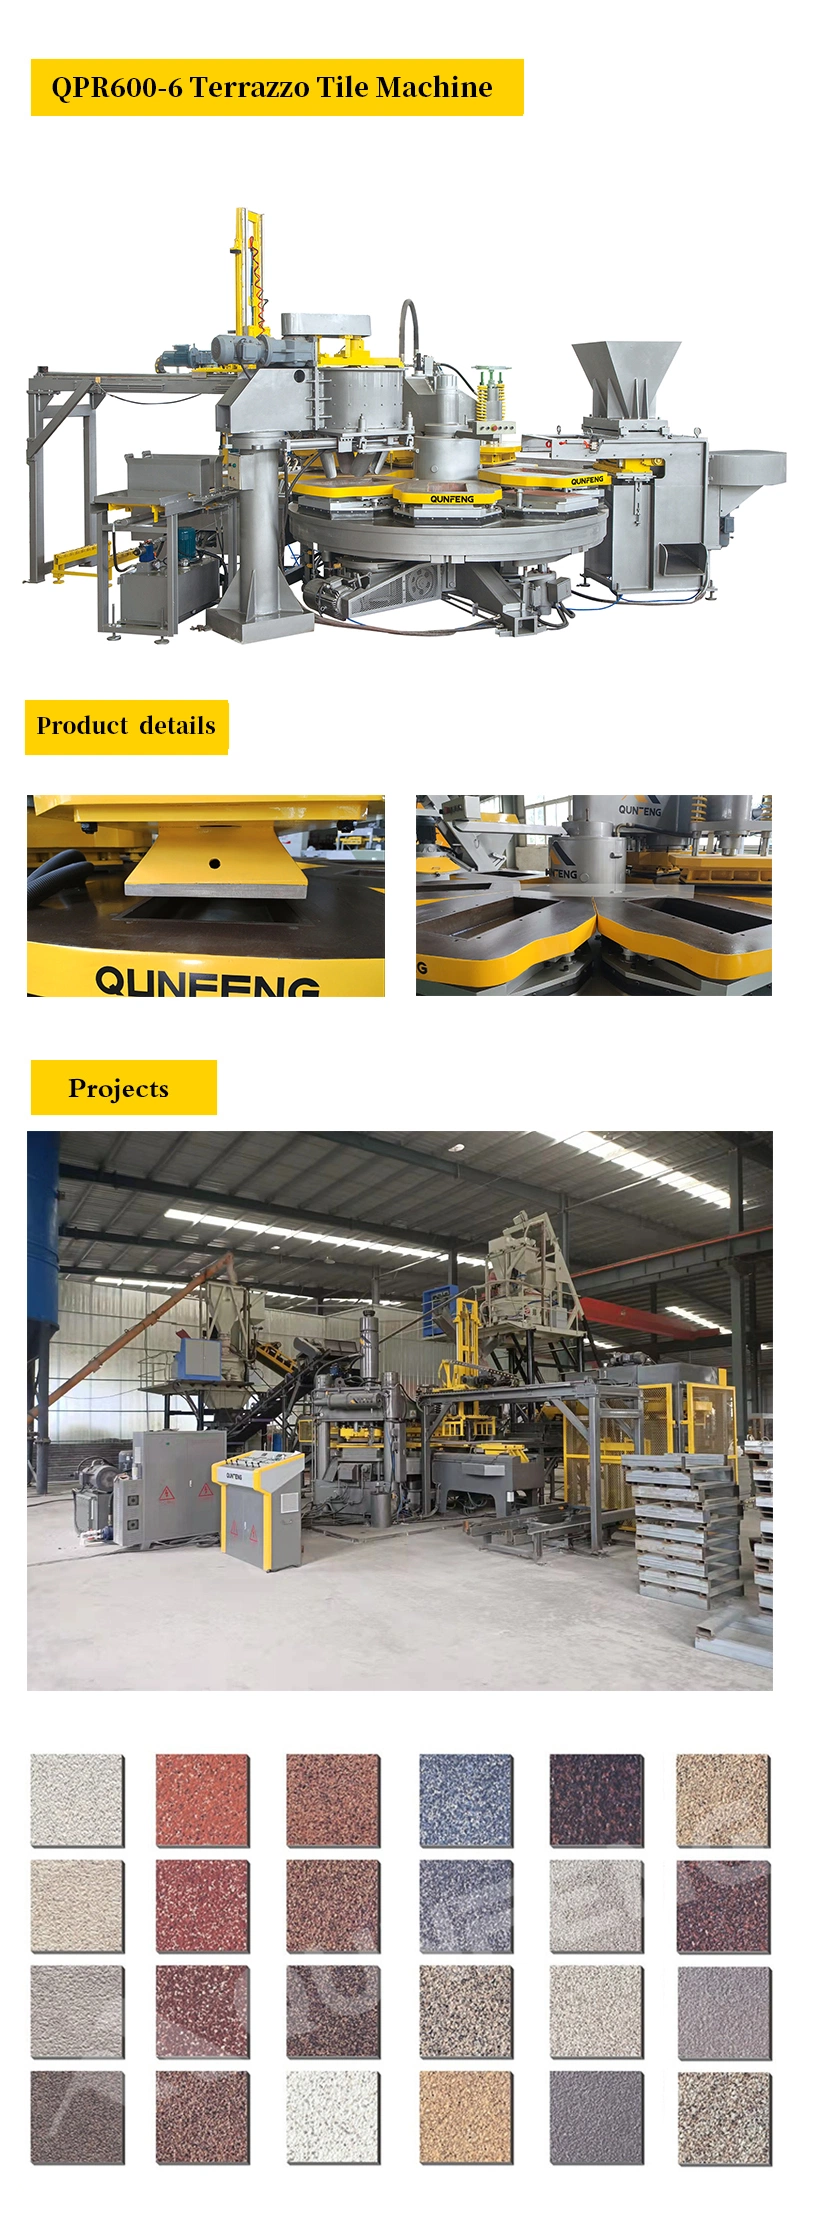 Top Quality Fully Automatic Terrazzo Tile Molding Machine Factory Outlet